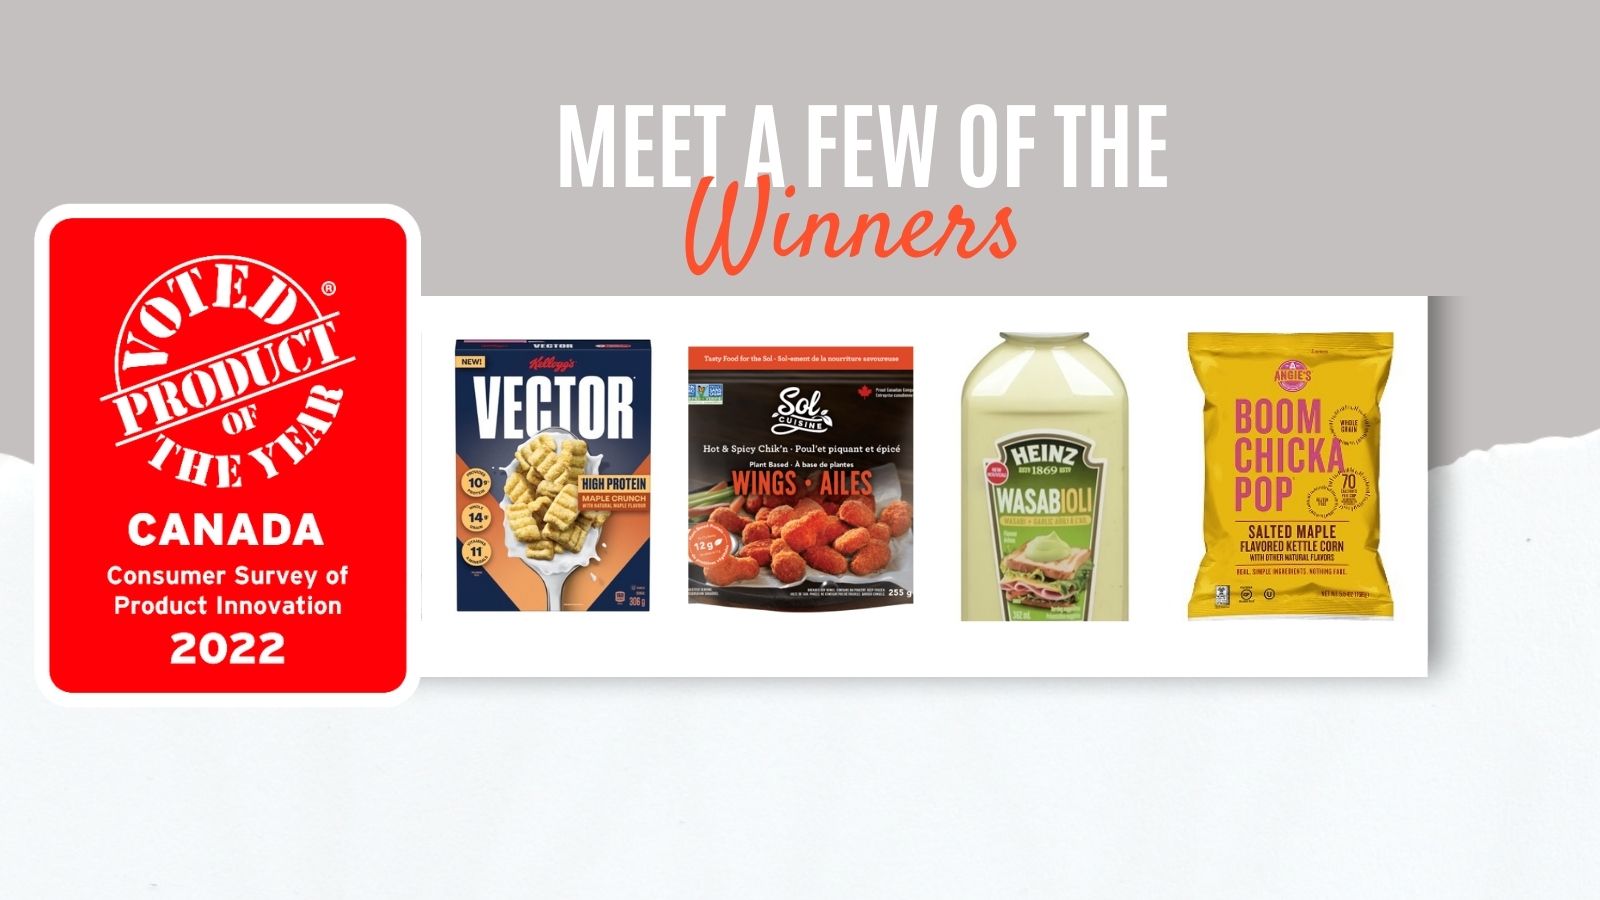 A red square announcing the 2022 Product of the Year award winners. A display of winning products including Vector cereal, Sol Cuisine chick'n wings, Heinz wasabioli mayo and maple syrup flavoured popocorn.